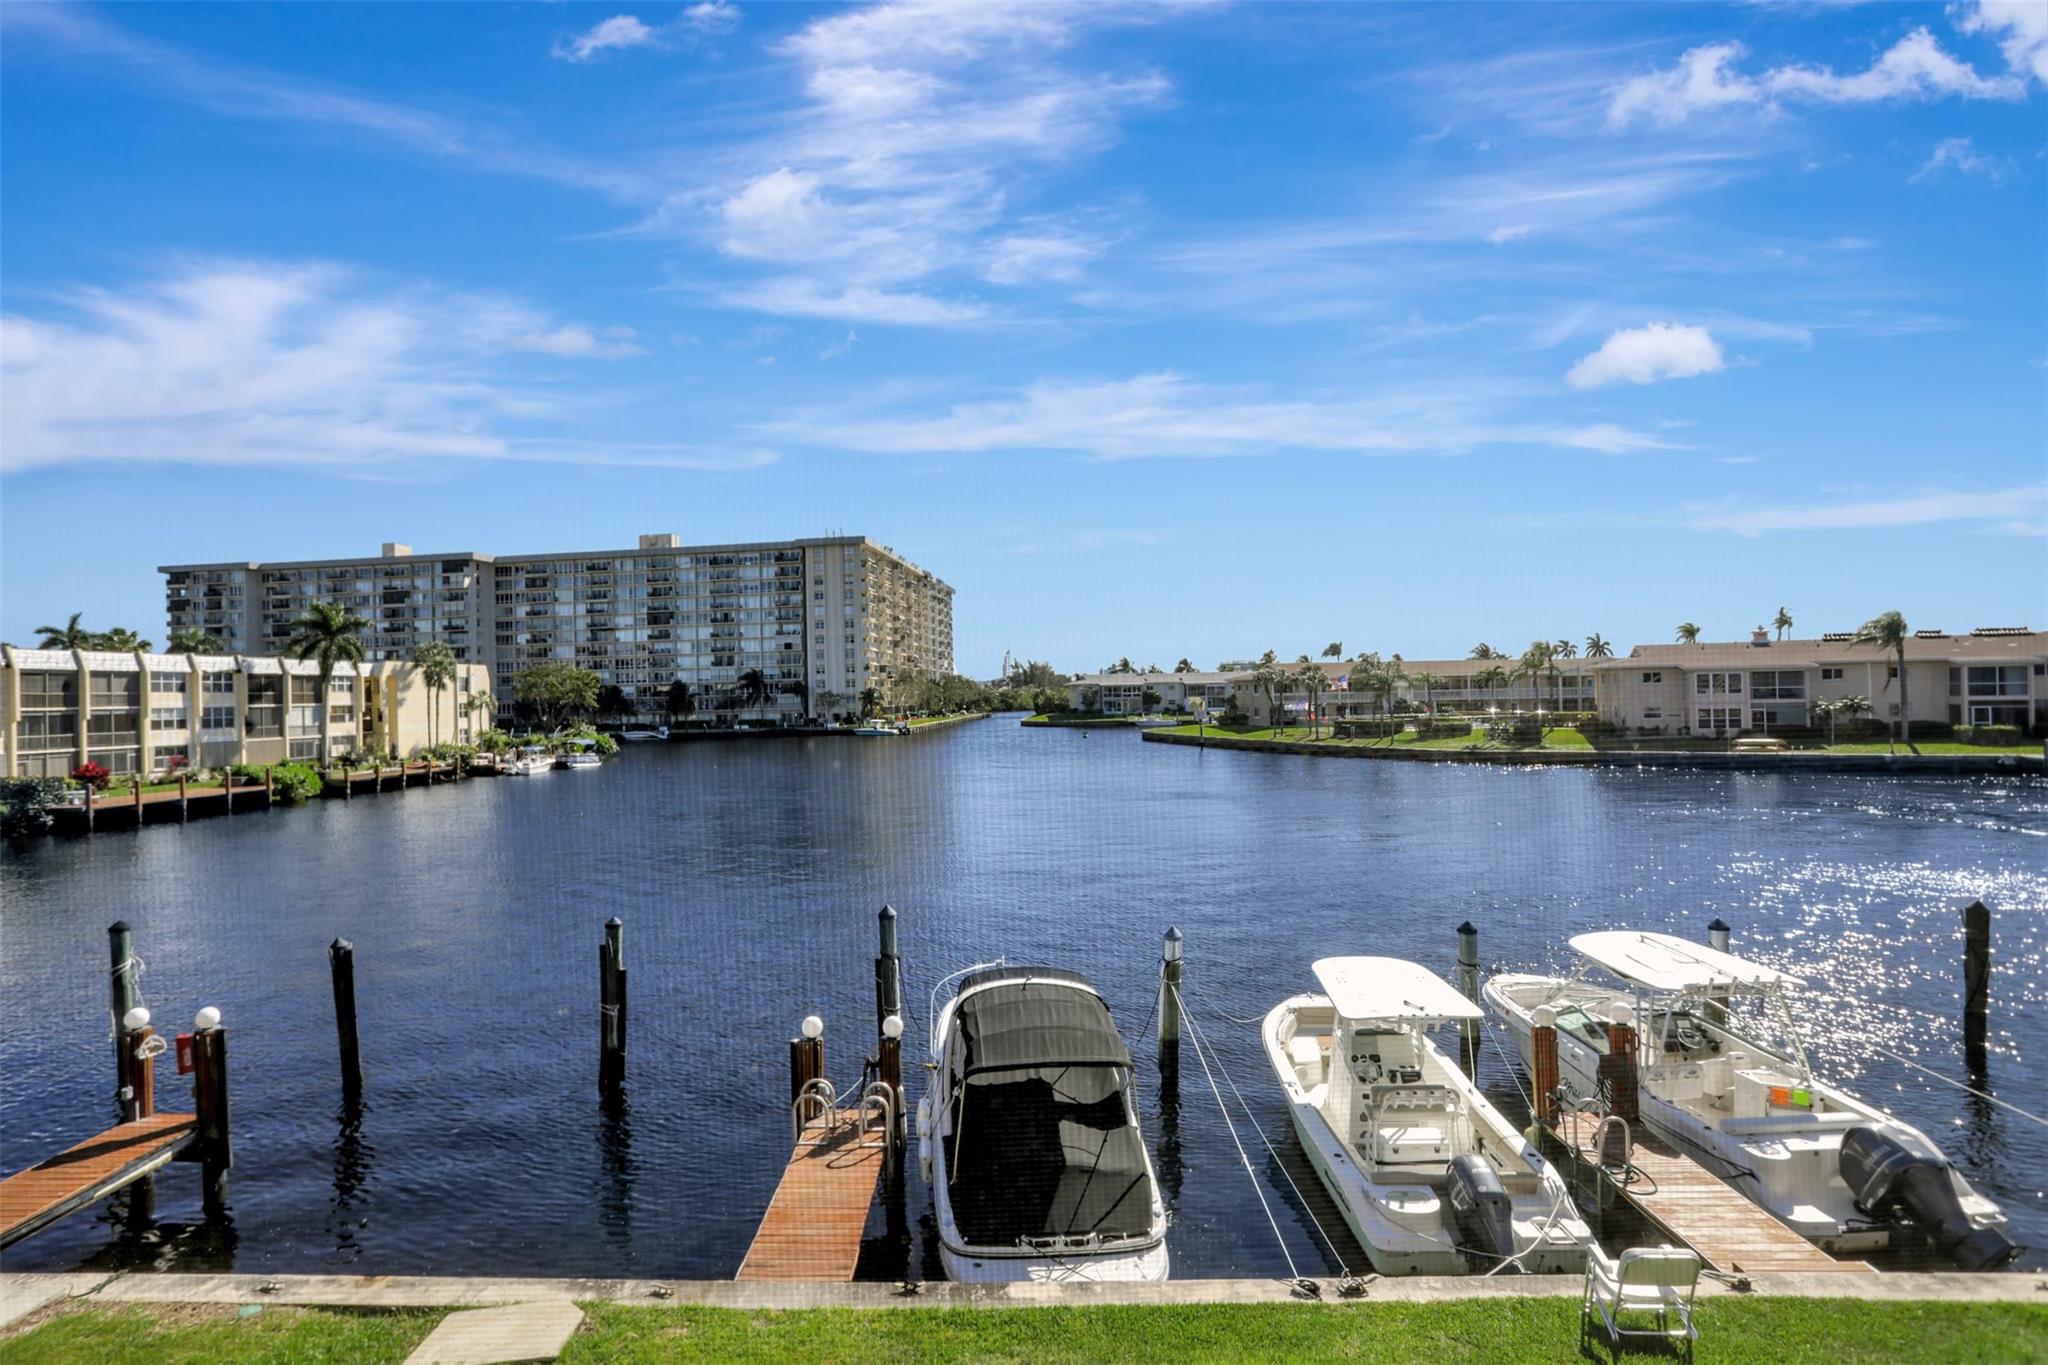 YOU WON'T BELIEVE YOUR EYES WHEN YOU SEE THIS SPECTAULAR 2/2 W/A FREE DEEDED DOCK ON THE WIDEST PART OF THE WATERWAY!THIS TOTALLY REMODELED APT. HAS ALL THE BELLS & WHISTLES INCLUDING A BEAUTIFUL WOOD KITCHEN W/ STAINLESS STEEL APPLIANCES & STONE COUNTERTOP!BAMBOO WOOD FLOORING!BOTH BATHROOMS HAVE BEEN UPDATED W/ A STONE STEP IN SHOWER IN THE MAIN & A JUCUZZI JETTED TUB IN THE GUEST W/ A GLASS ENLAID SINK & COUNTER TOP! NEWER WASHER & DRYER IN THE UNIT W/A WALK-IN LAUNDRYROOM!COVERED PRKG SPOT #44 YOU CAN SEE YOUR BOAT FROM RIGHT OUT ON THE EXPANSIVE REAR PATIO! FUN ACTIVITIES WITHIN THE COMMUNITY W/TENNIS/PICKLE BALL/COMM. POOL ALL WITHIN EYE SIGHT OF YOUR FRONT DOOR! MAINT. OF ONLY $679 INCLUDES: BUILD. EXT./LNDSCPG & LAWN/INT. PEST CONTROL/POOL SERVICE/REC. FACIL./SECURITY/TRASH/WATER!